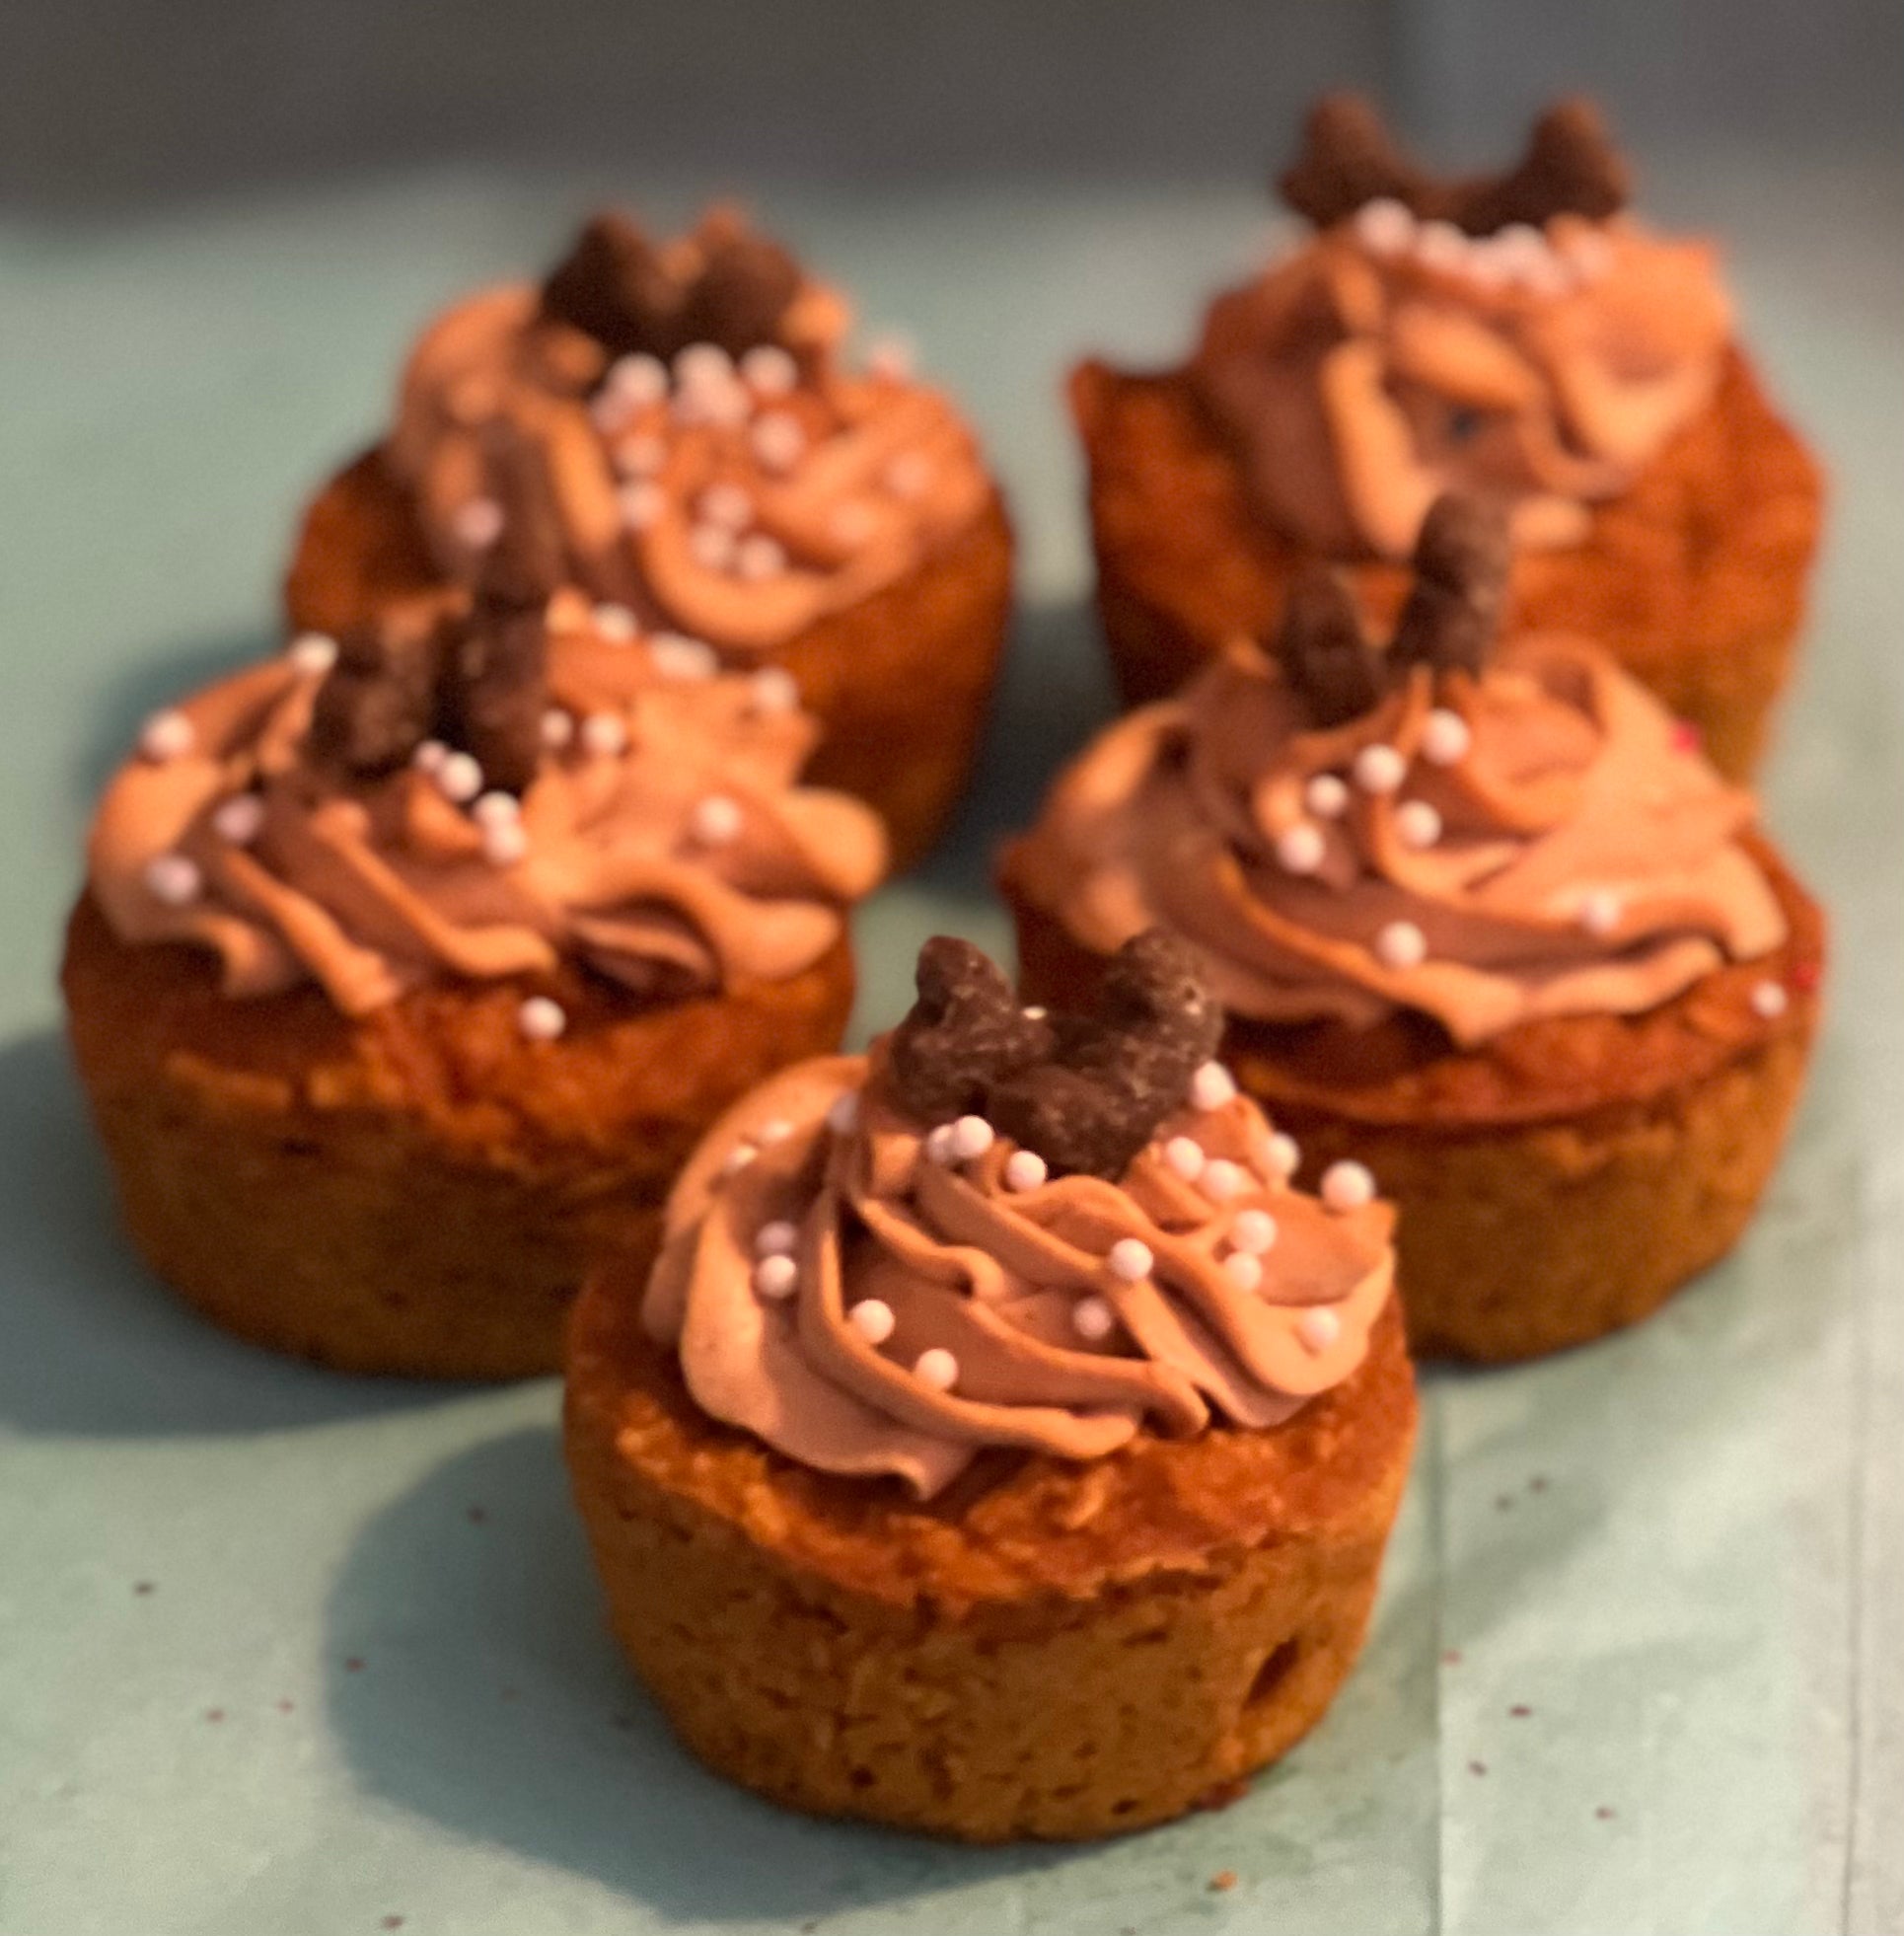 2 - Large Pumpkin and Peanut Butter Pupcake - Boxed